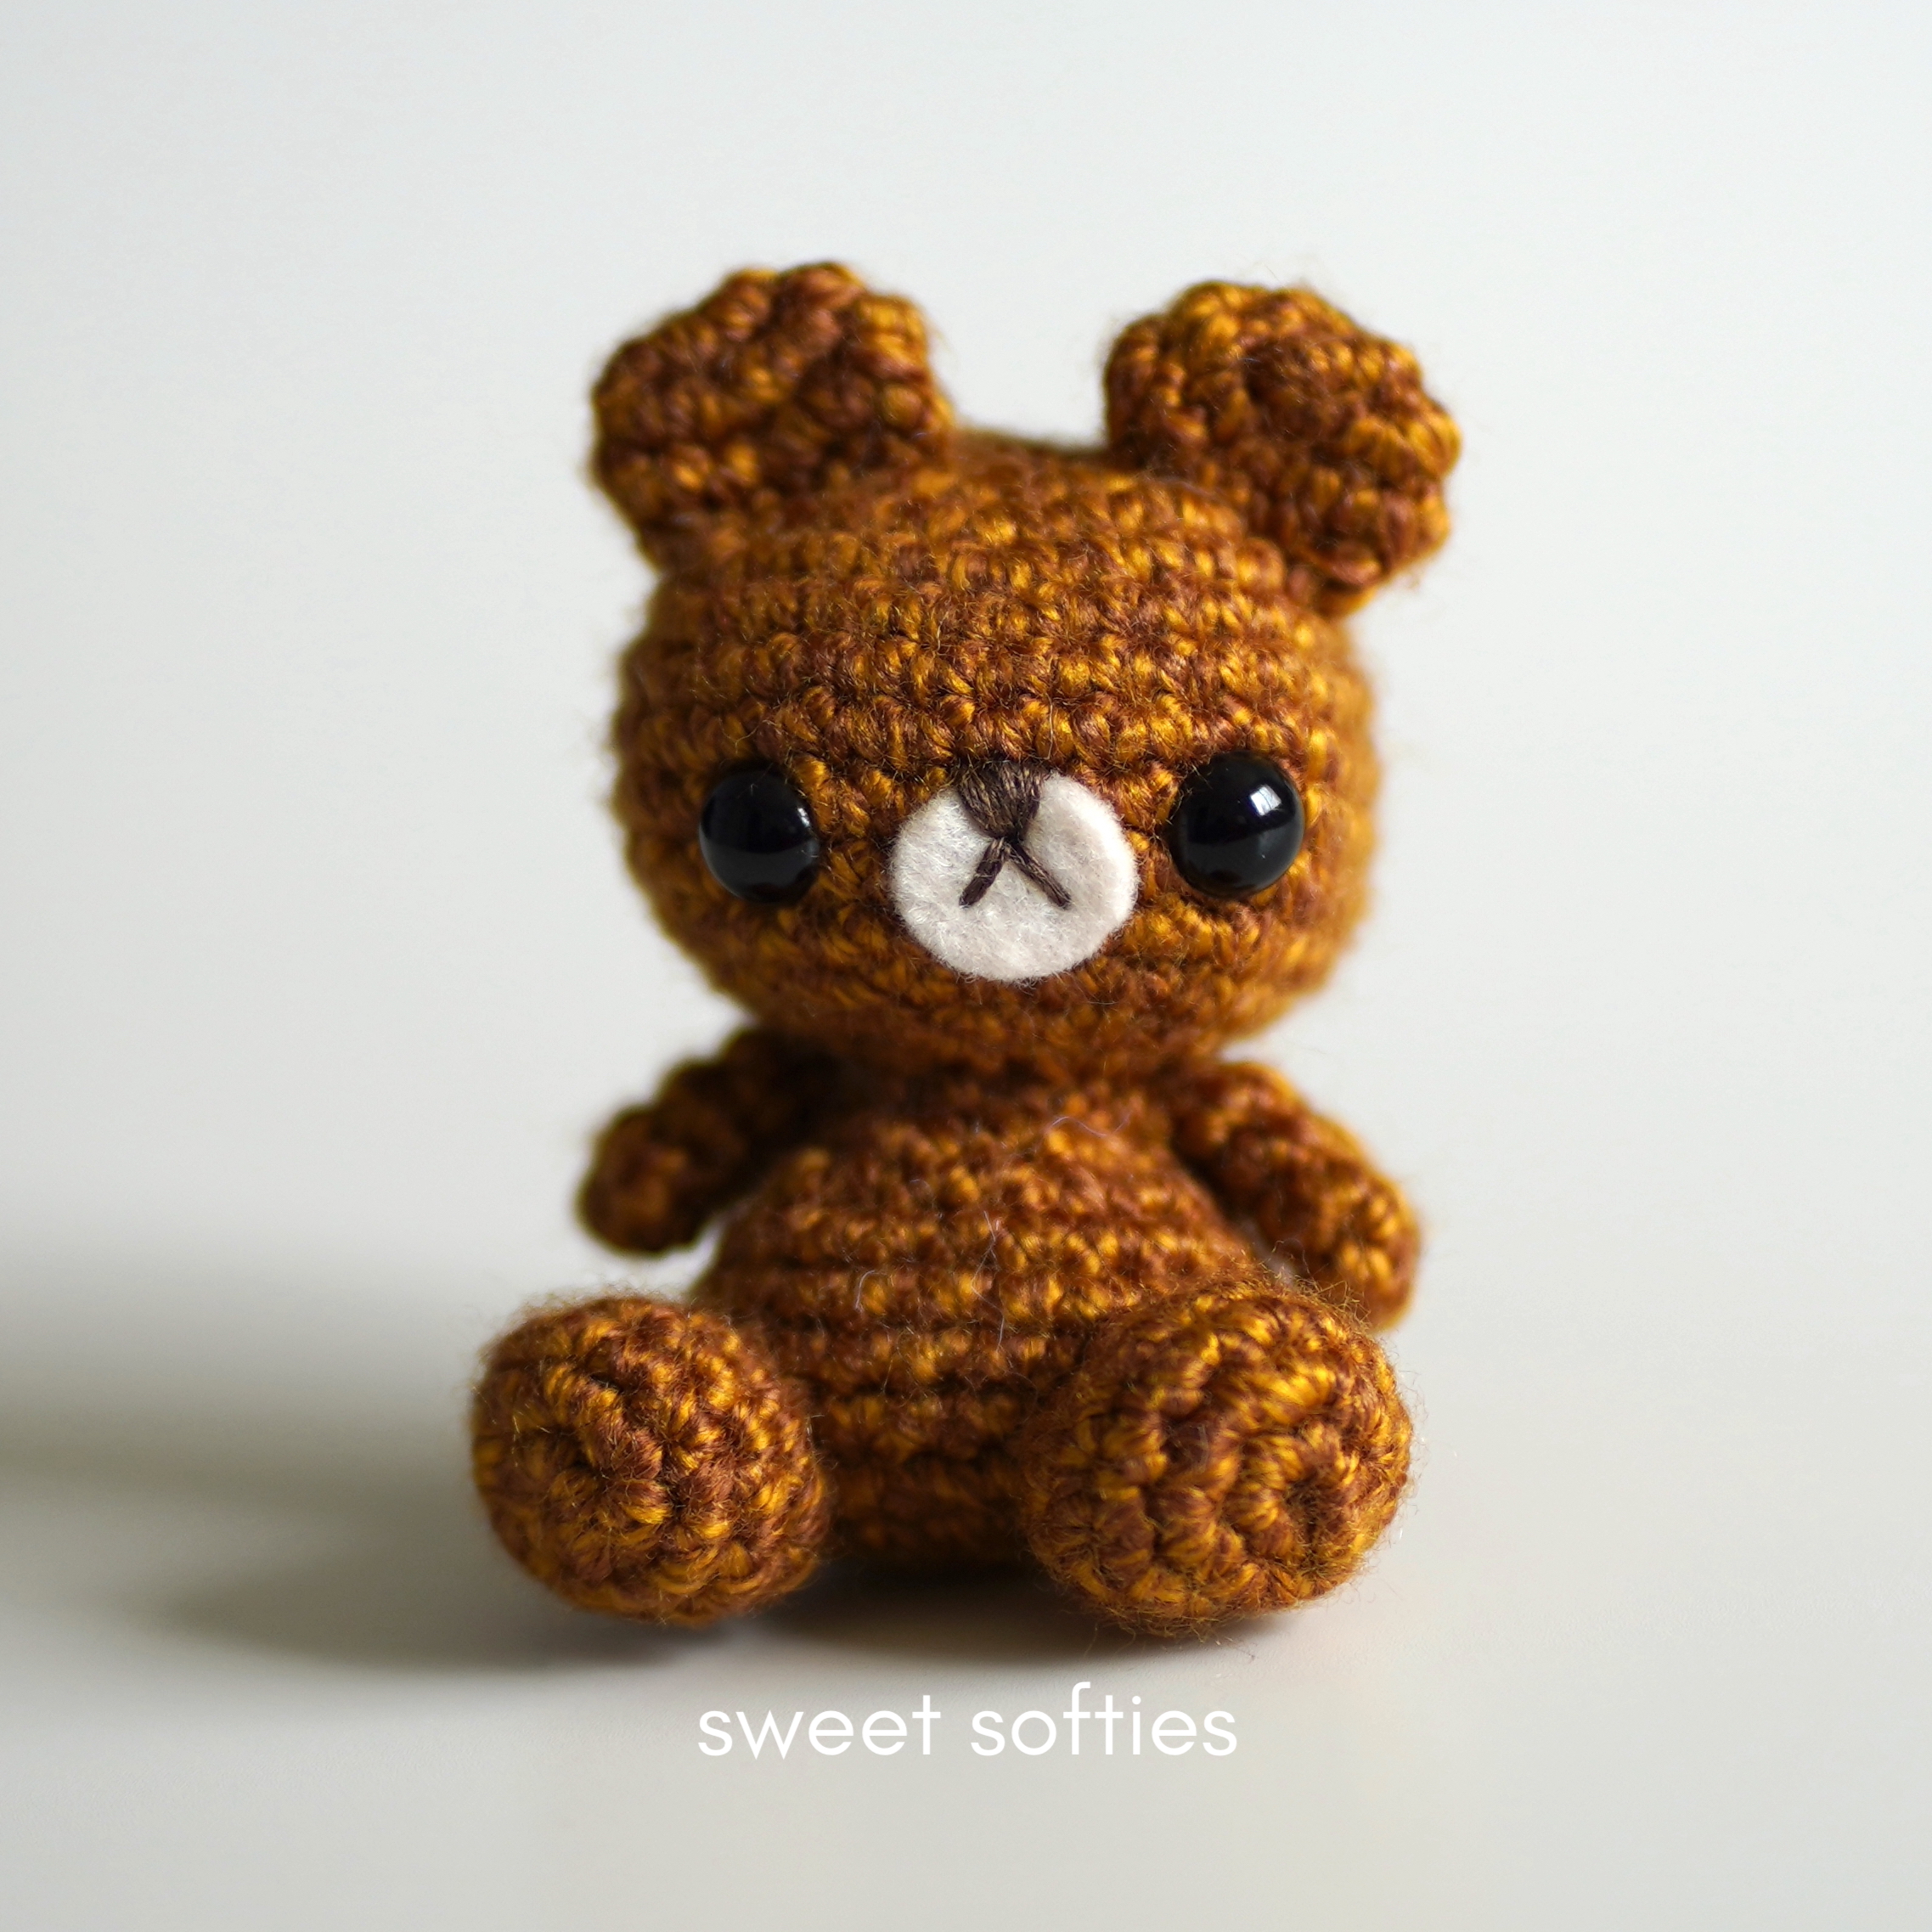 Teddy Bear DIY for Beginners with Sewing Instructions in Details, Pattern  Available